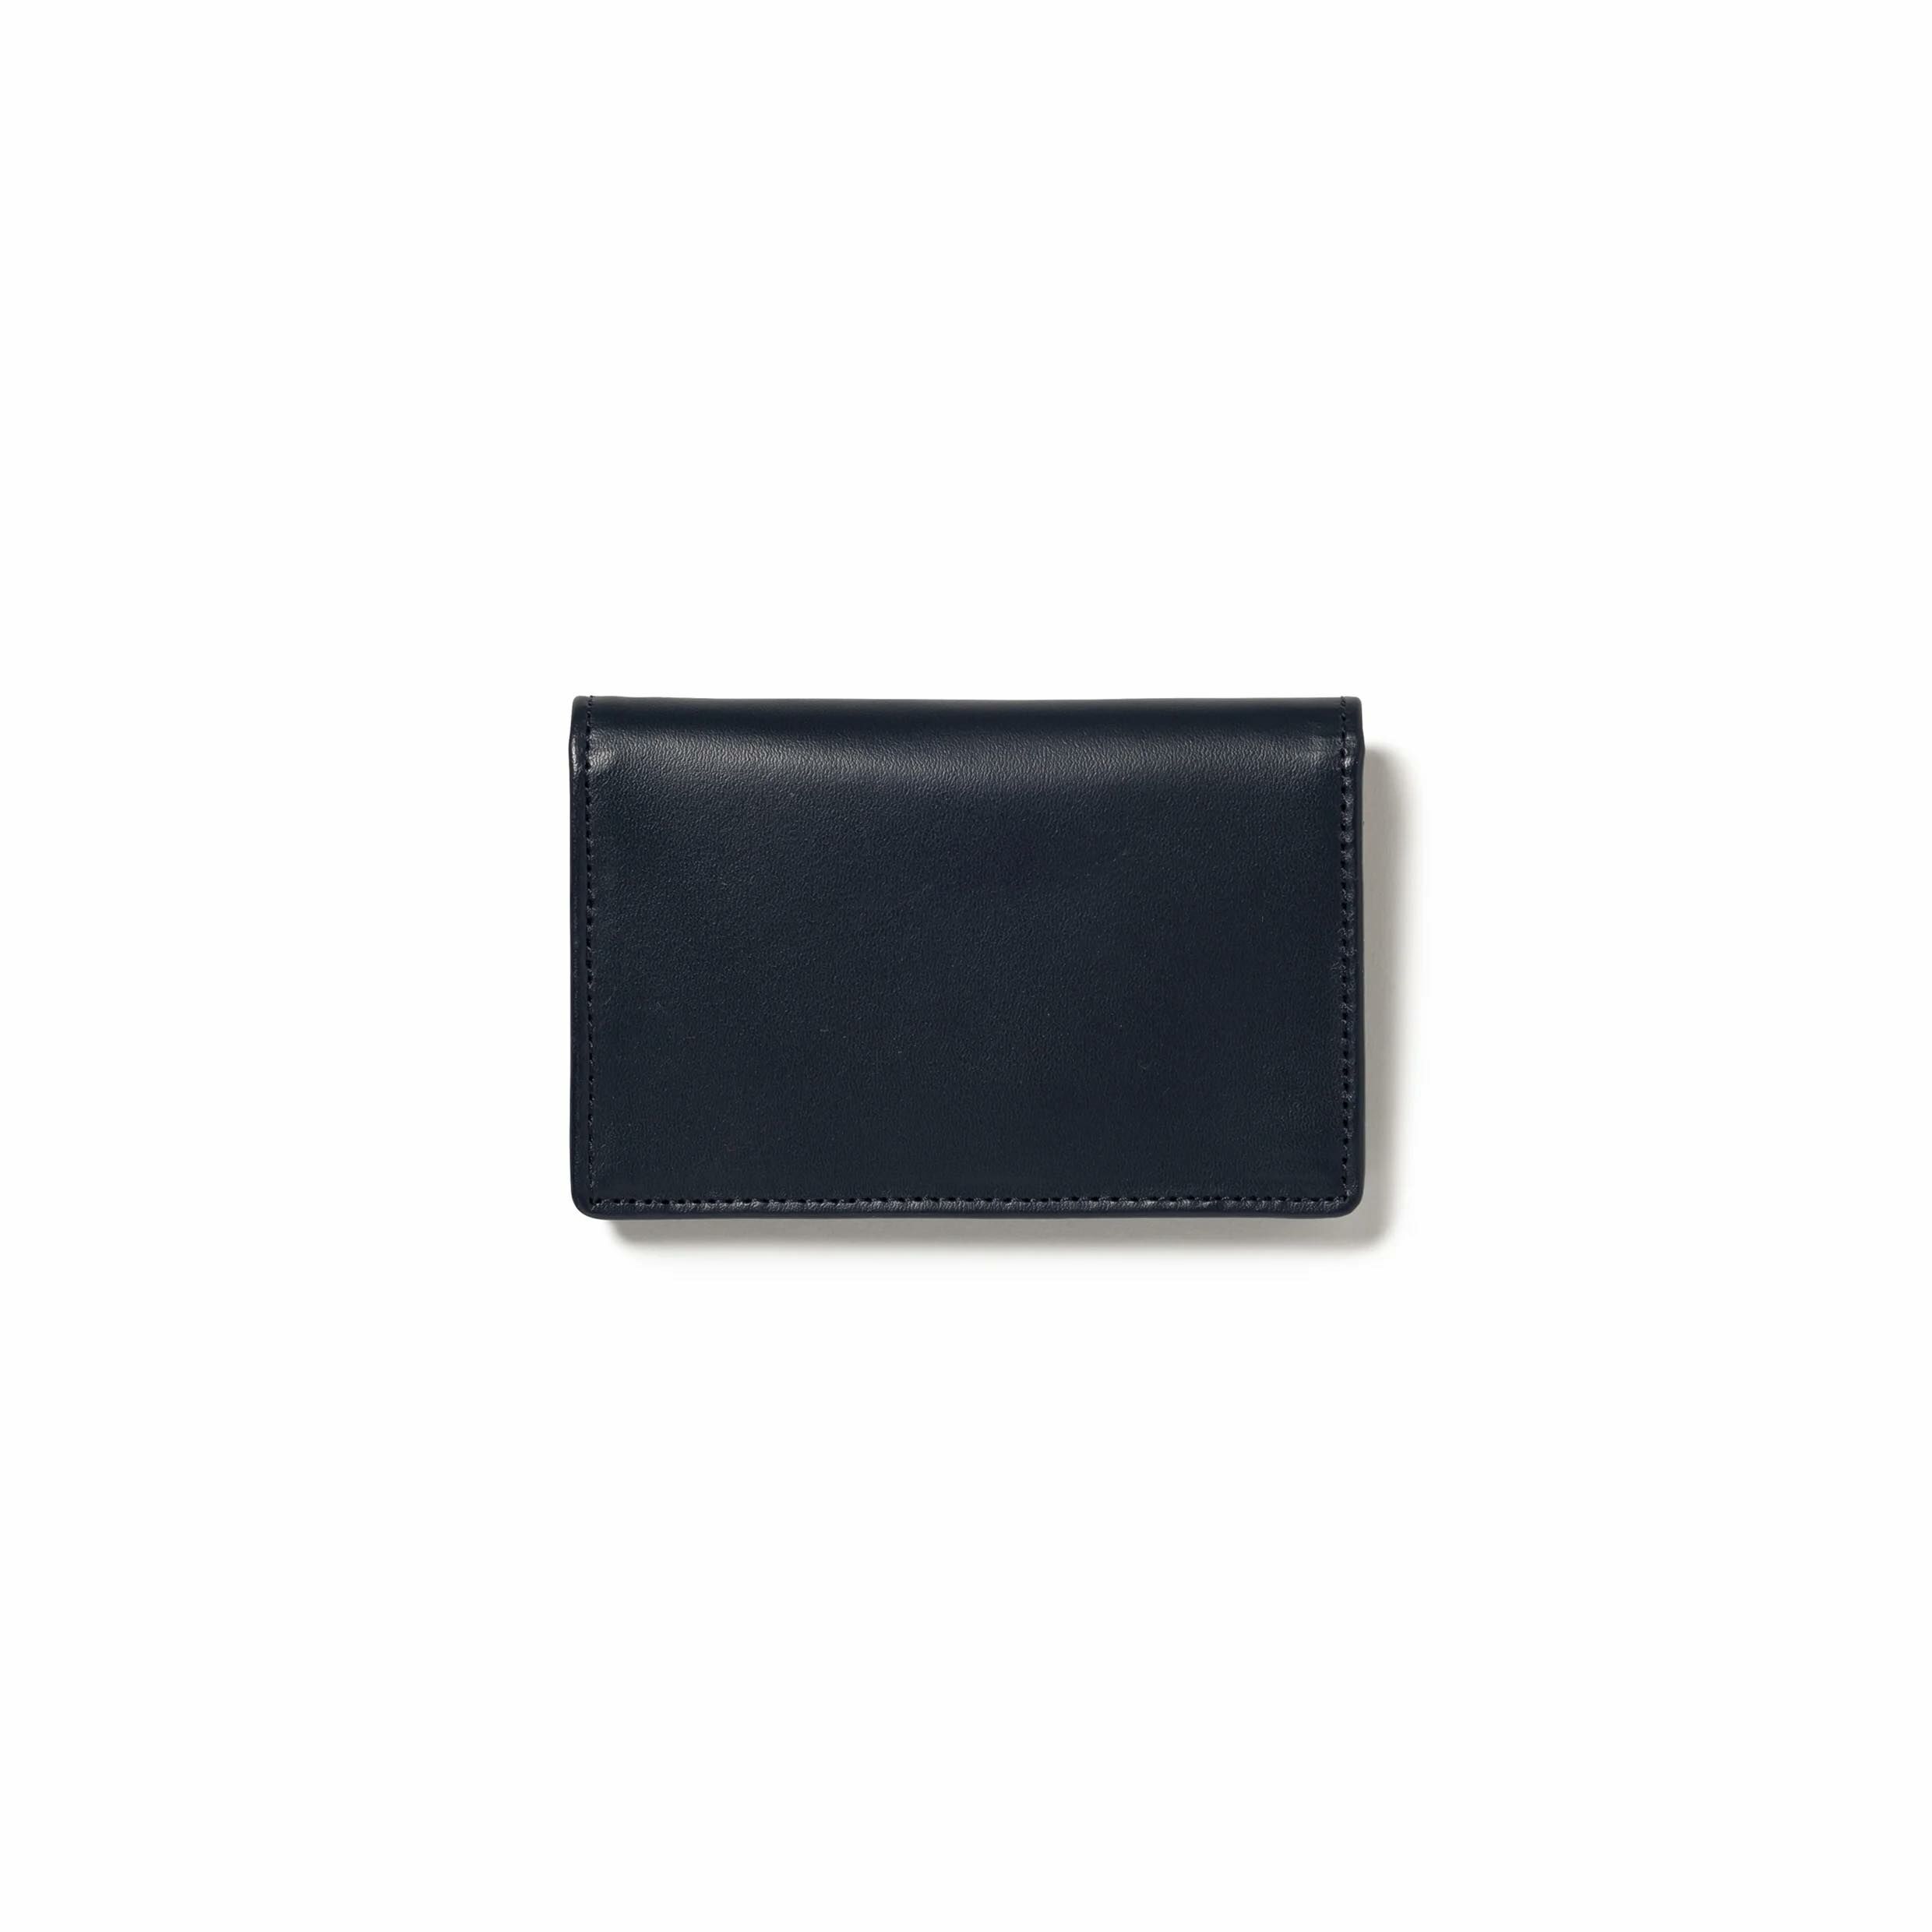 Human Made Leather Card Case (2Colors)